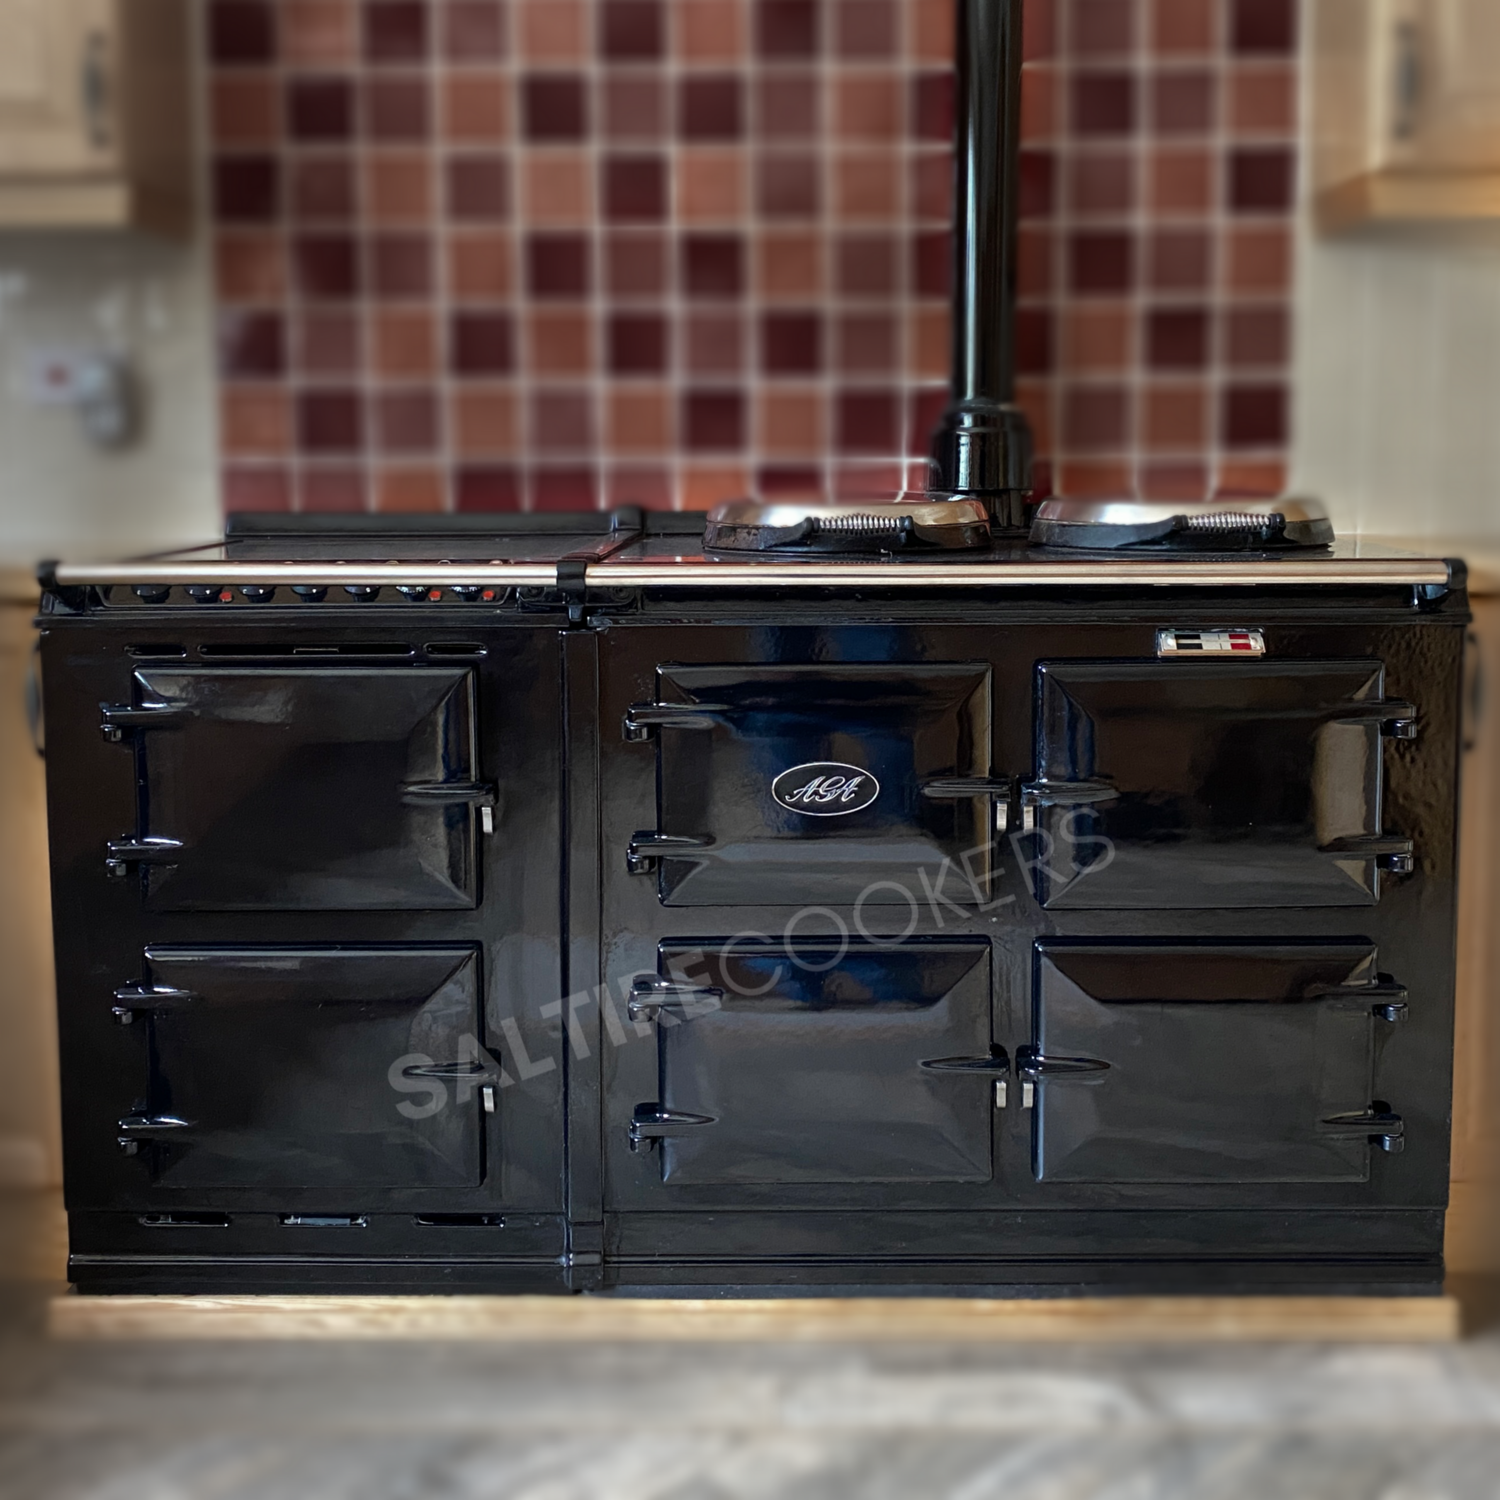 Reconditioned 3 Oven Gas Aga Cooker with Module (Black)